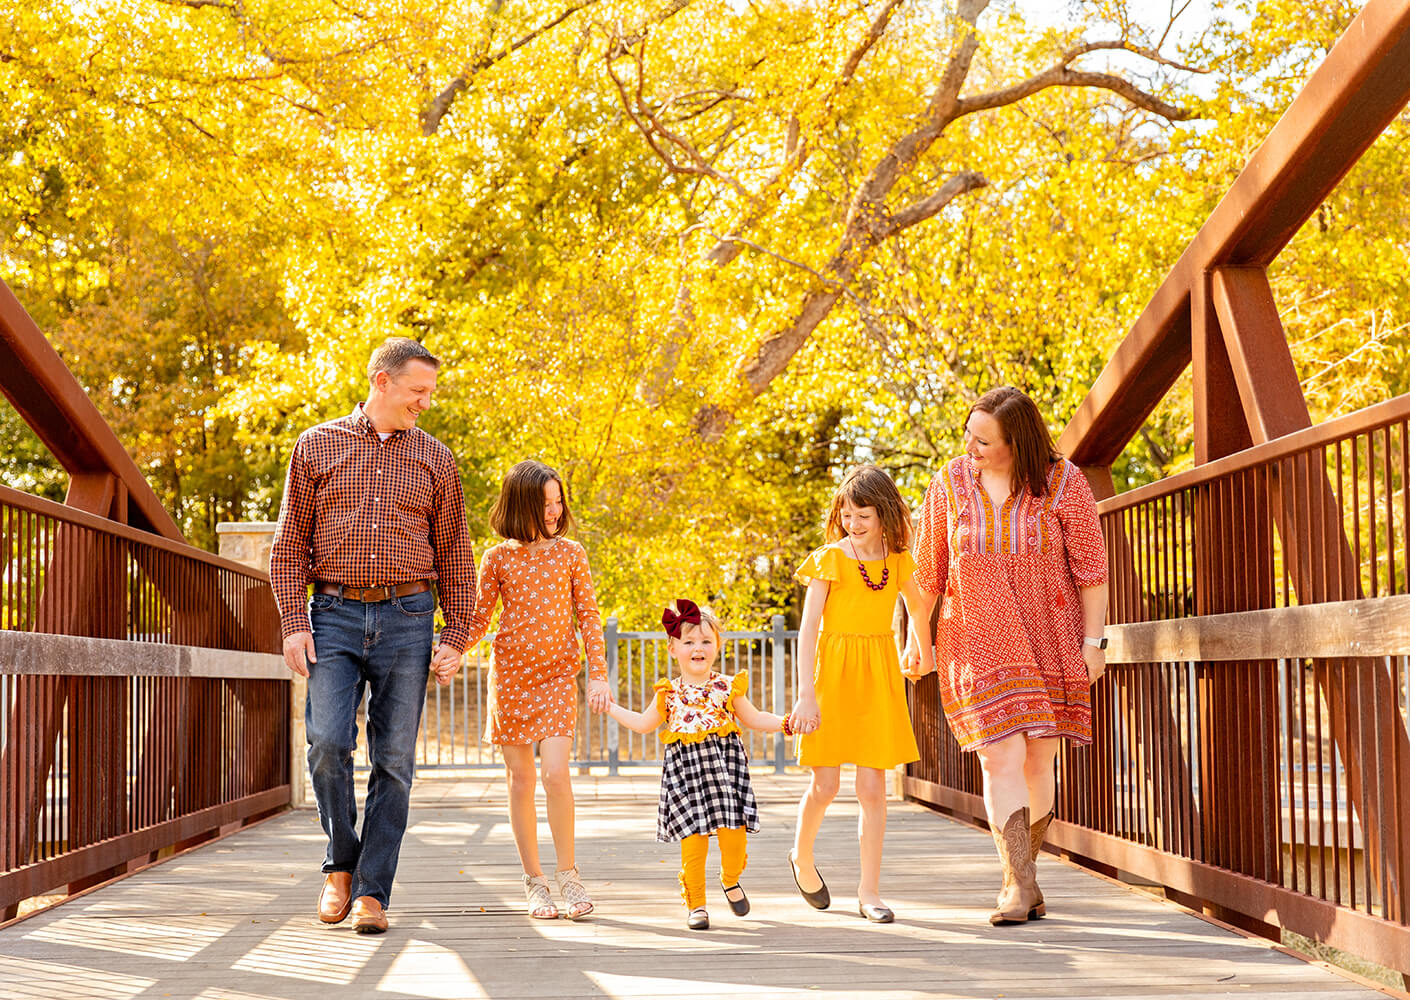 In this family portrait, Brad and wife and daughters smile at one another in front of a vibrant autumn scene